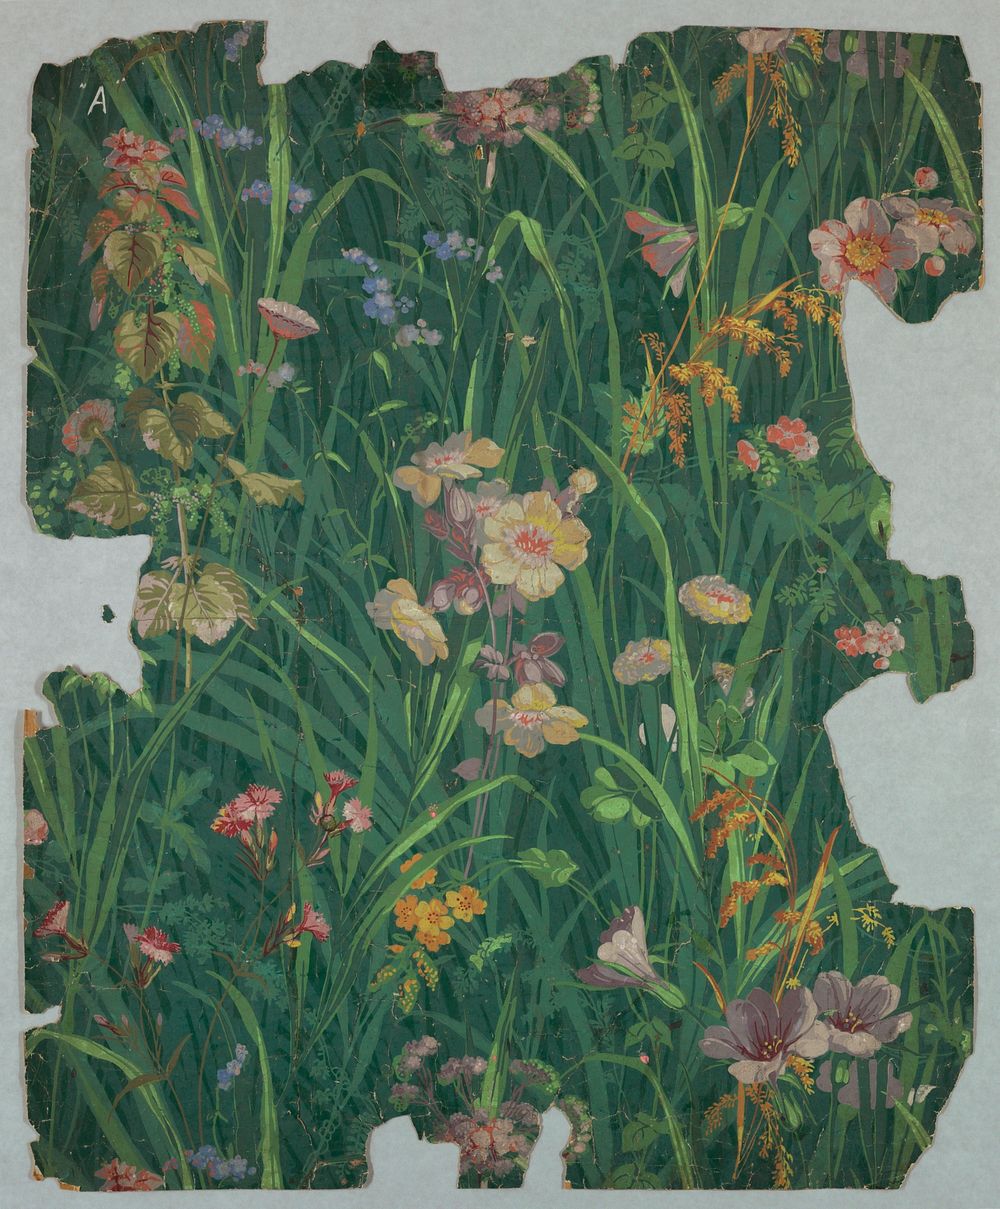 Grass with lavender, yellow and pink wildflowers (ca. 1875&ndash;1900) wallpaper in high resolution.  